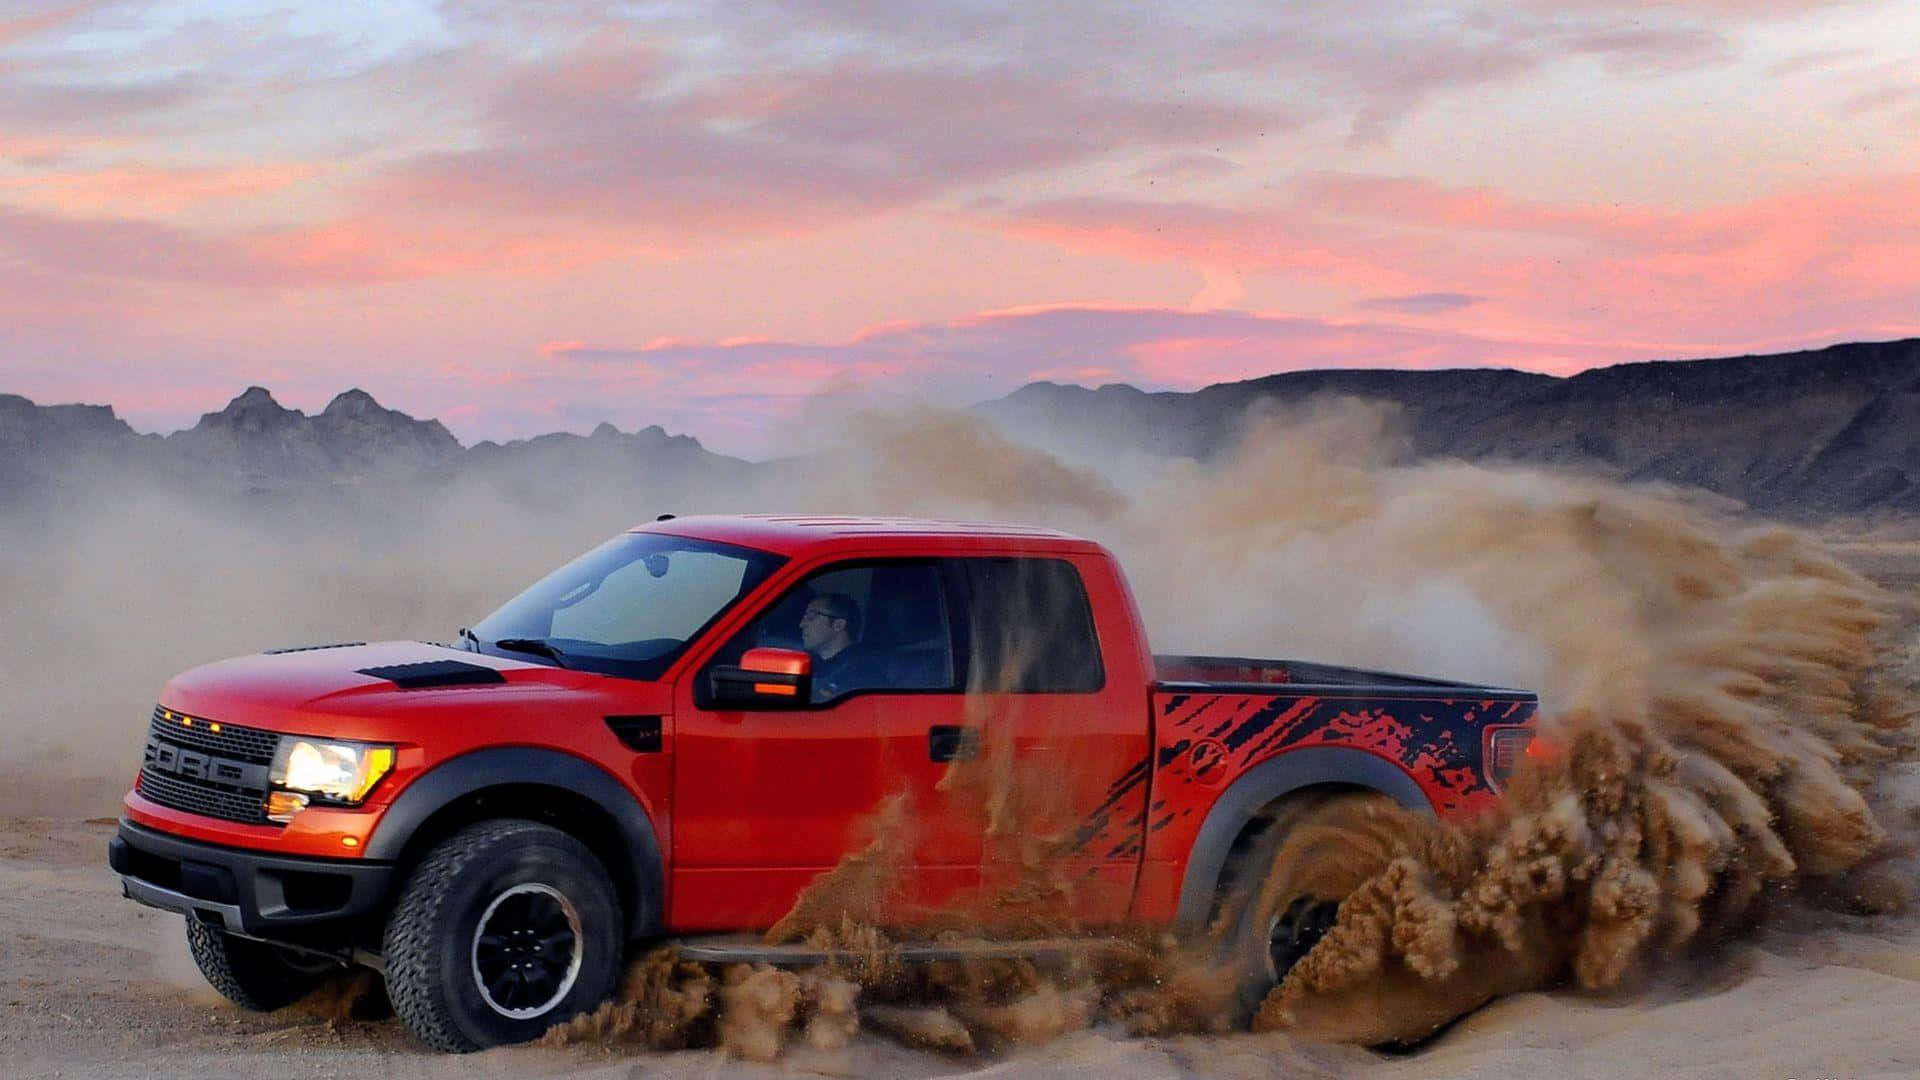 Stare into the menacing eyes of a powerful Ford Truck Wallpaper